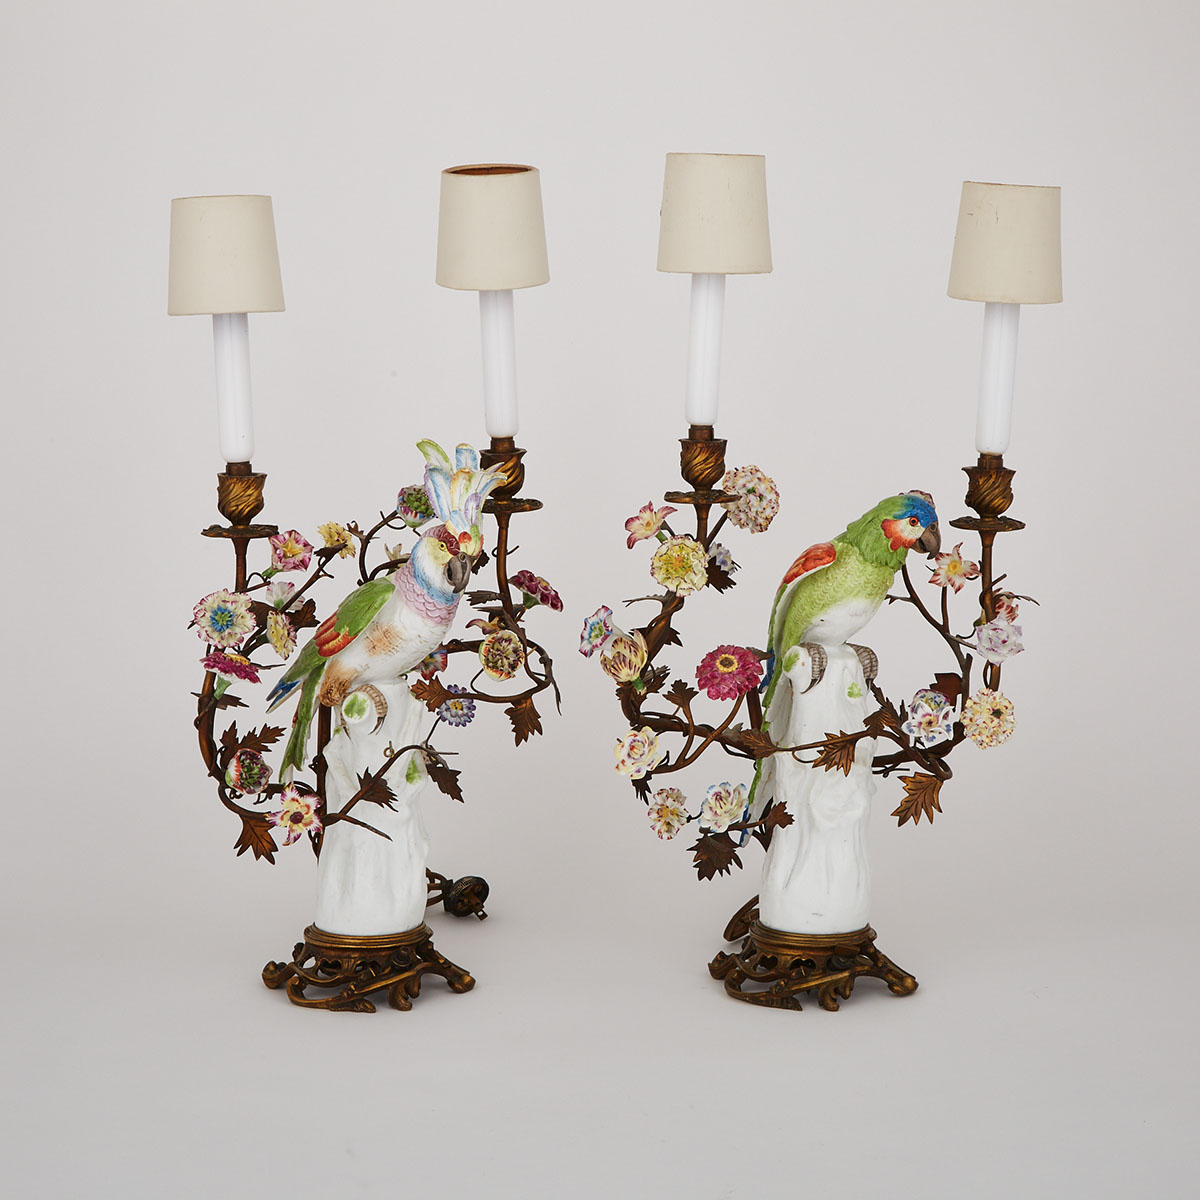 Pair of Gilt-Bronze Mounted German Porcelain Parrot Two-Light Table Lamps, late 19th/early 20th century